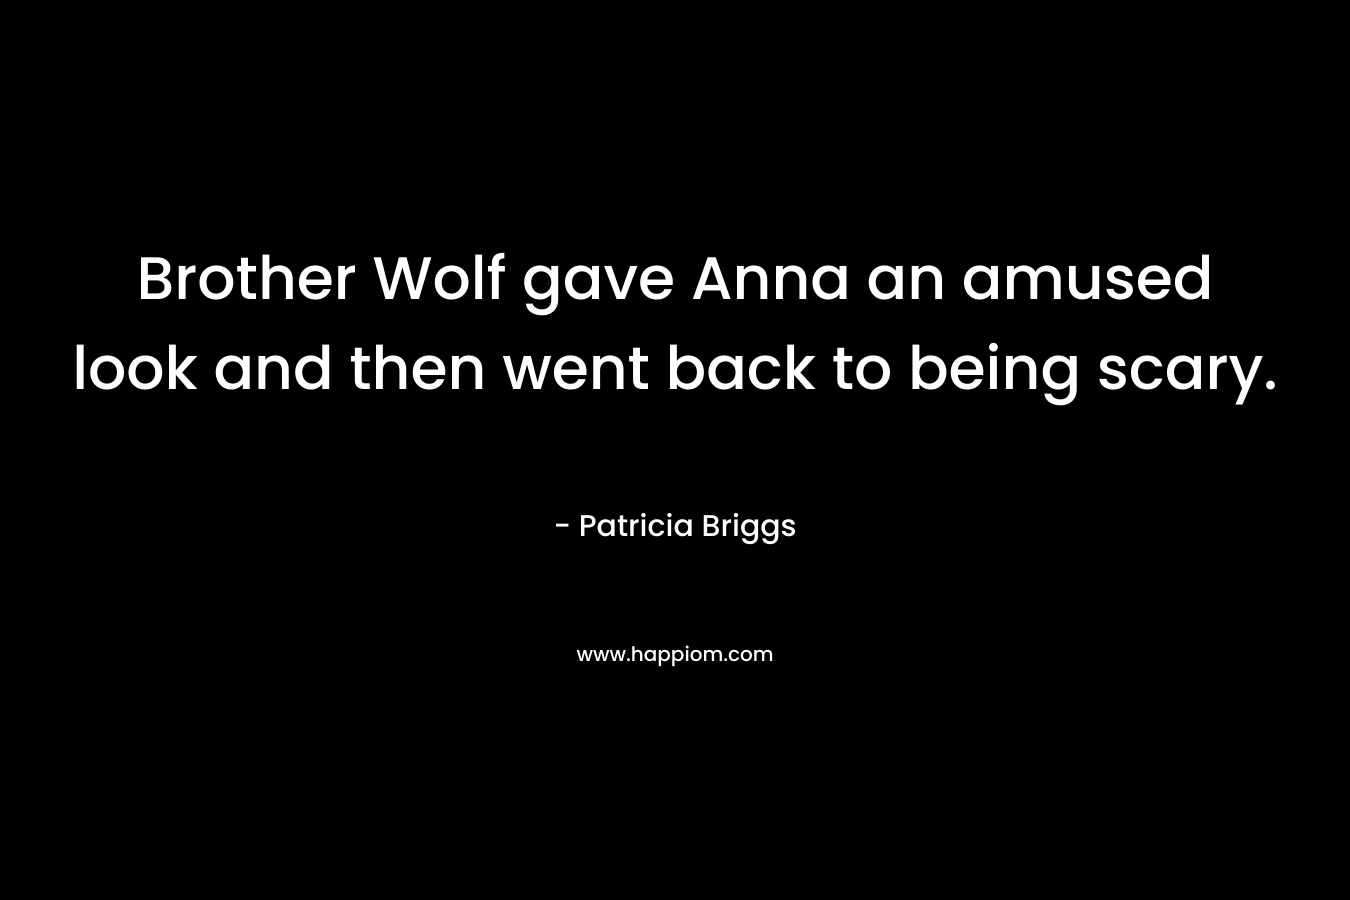 Brother Wolf gave Anna an amused look and then went back to being scary. – Patricia Briggs